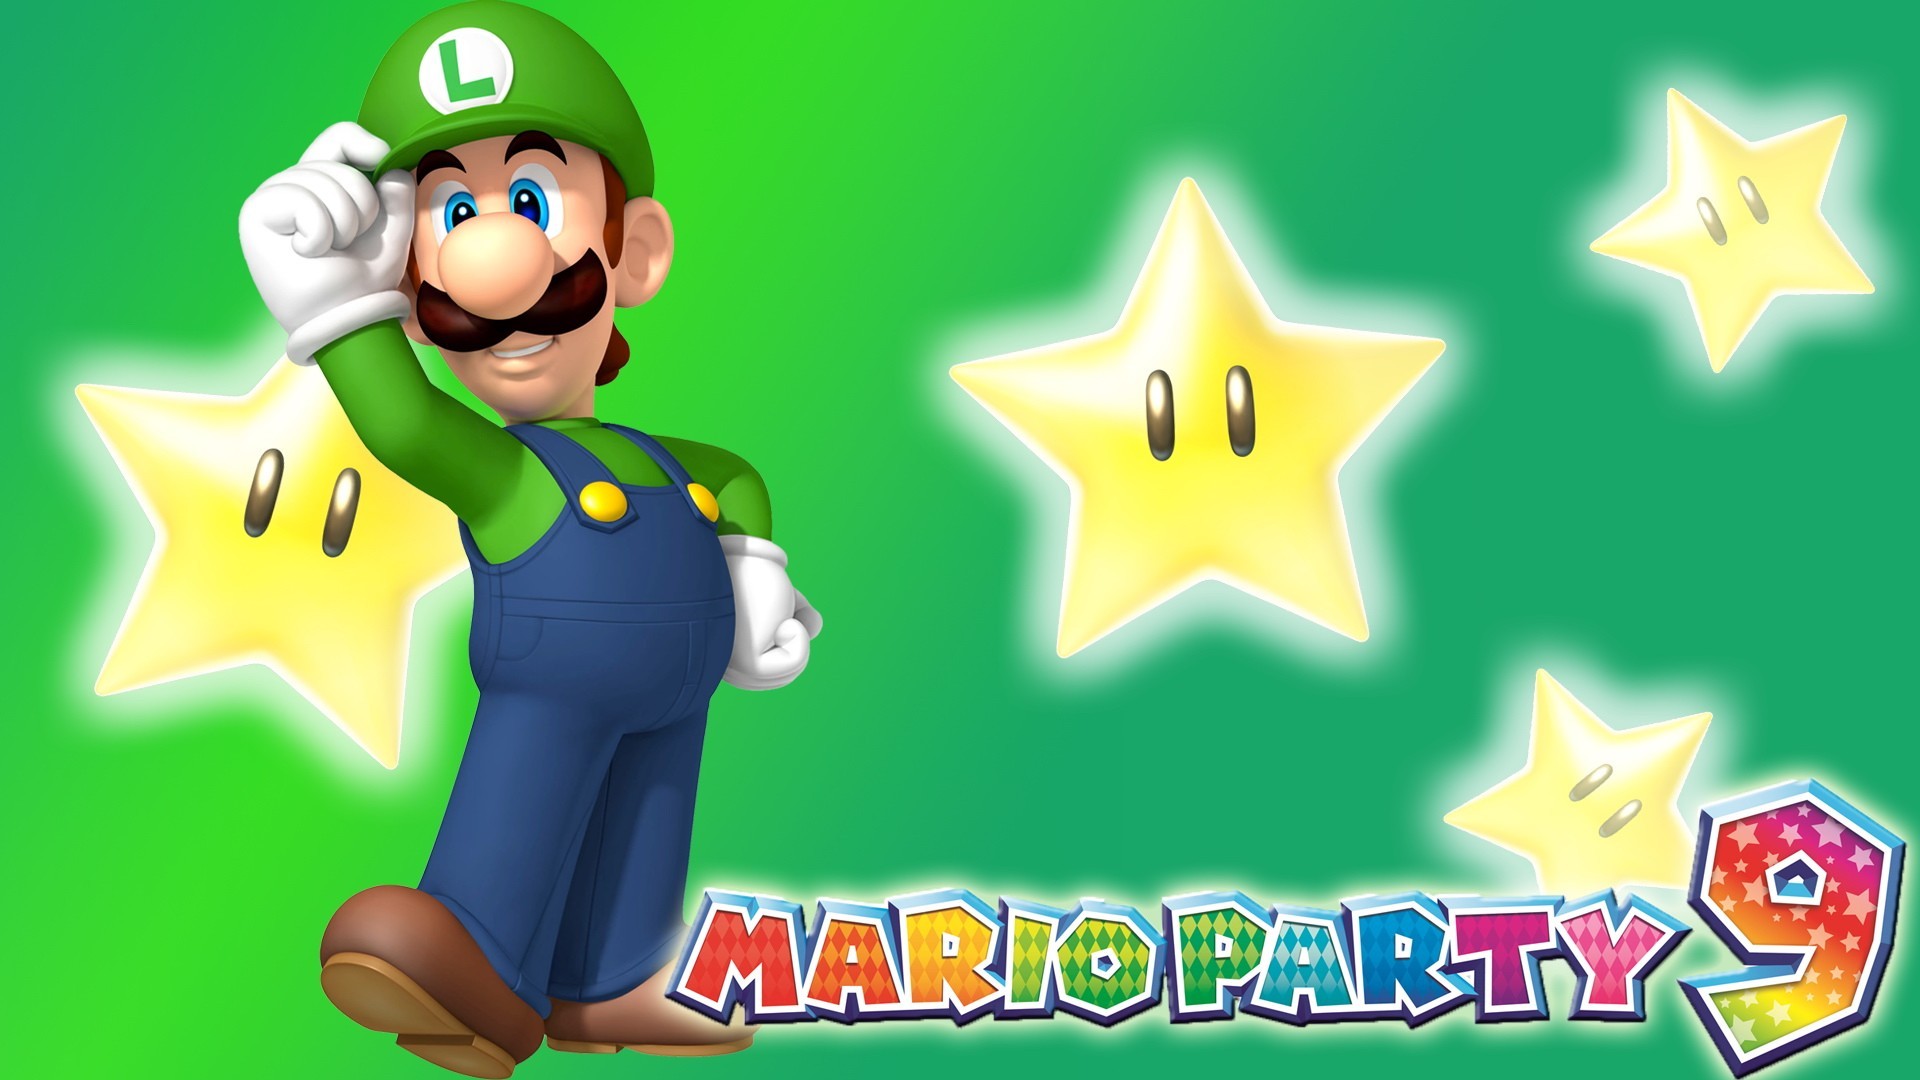 General 1920x1080 Mario Party Luigi video games Nintendo stars green background video game characters